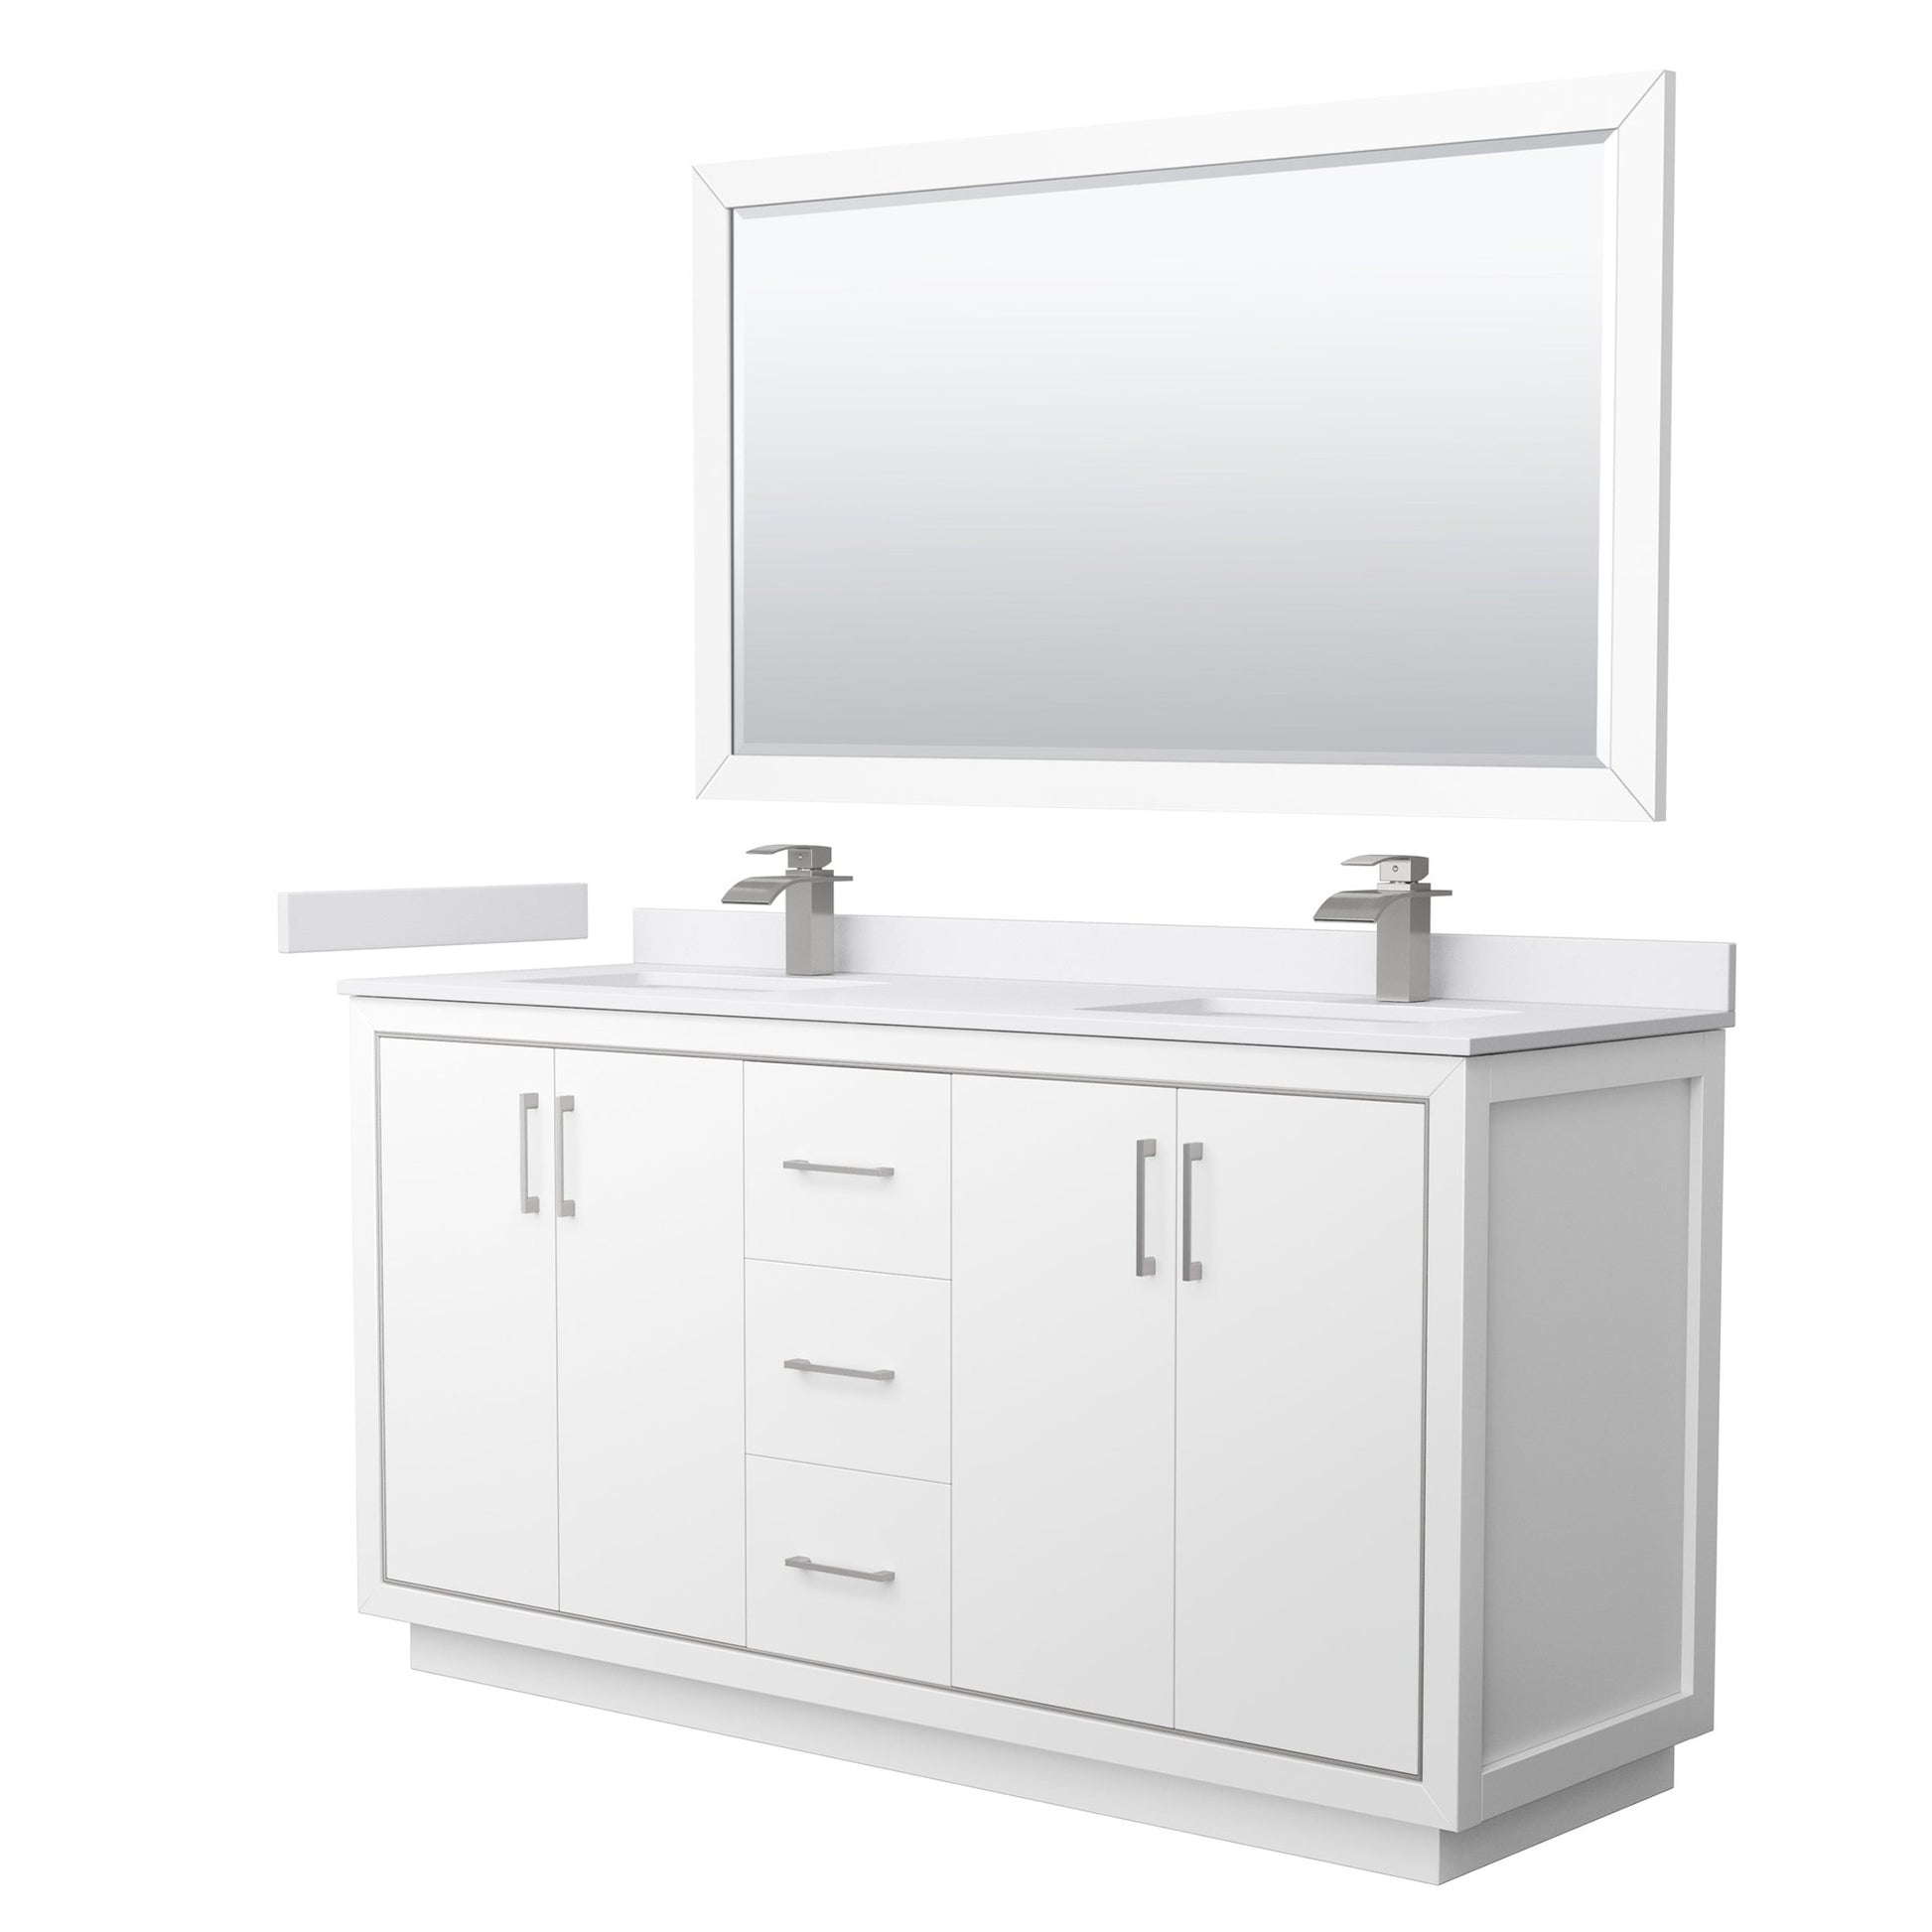 Wyndham Collection Icon 66" Double Bathroom Vanity in White, White Cultured Marble Countertop, Undermount Square Sinks, Brushed Nickel Trim, 58" Mirror